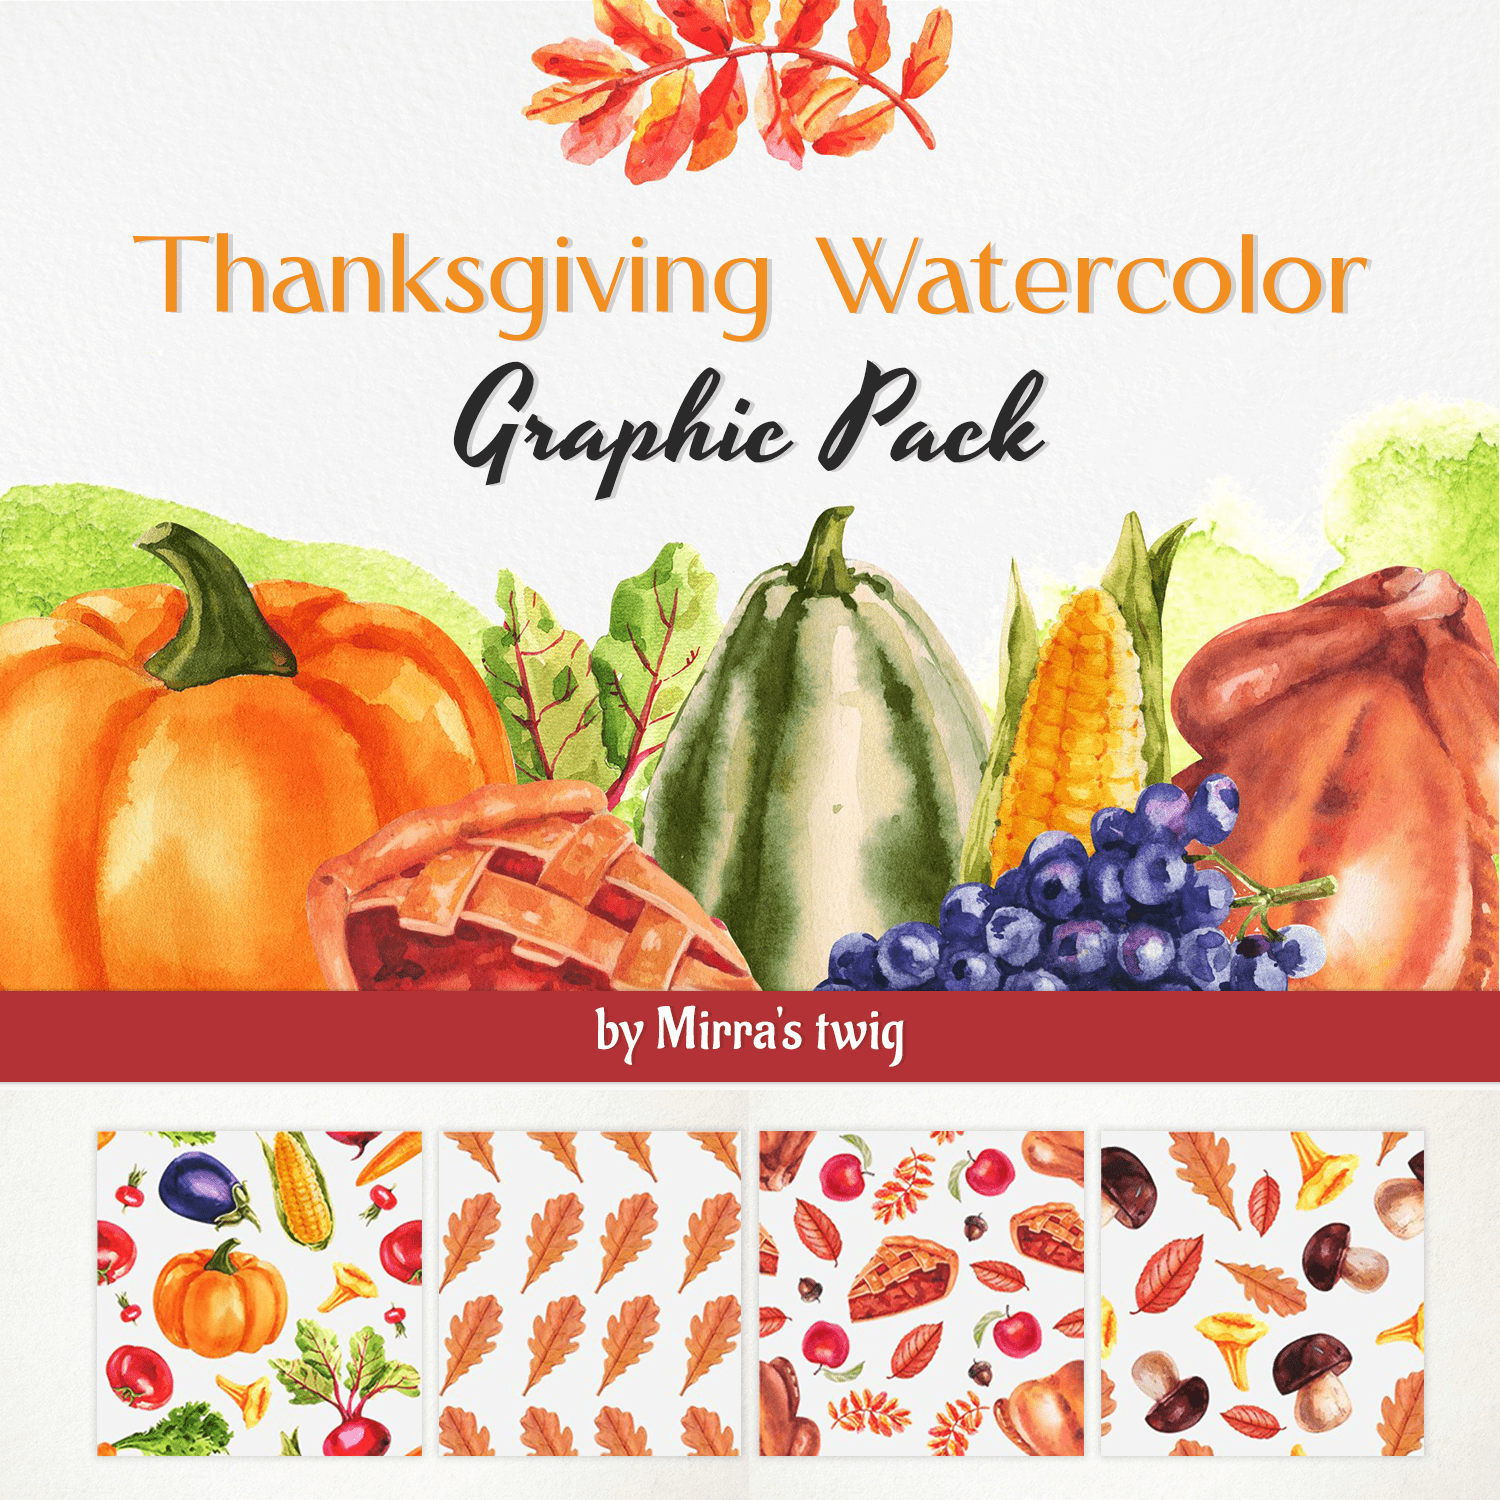 Thanksgiving Watercolor Graphic Pack cover.